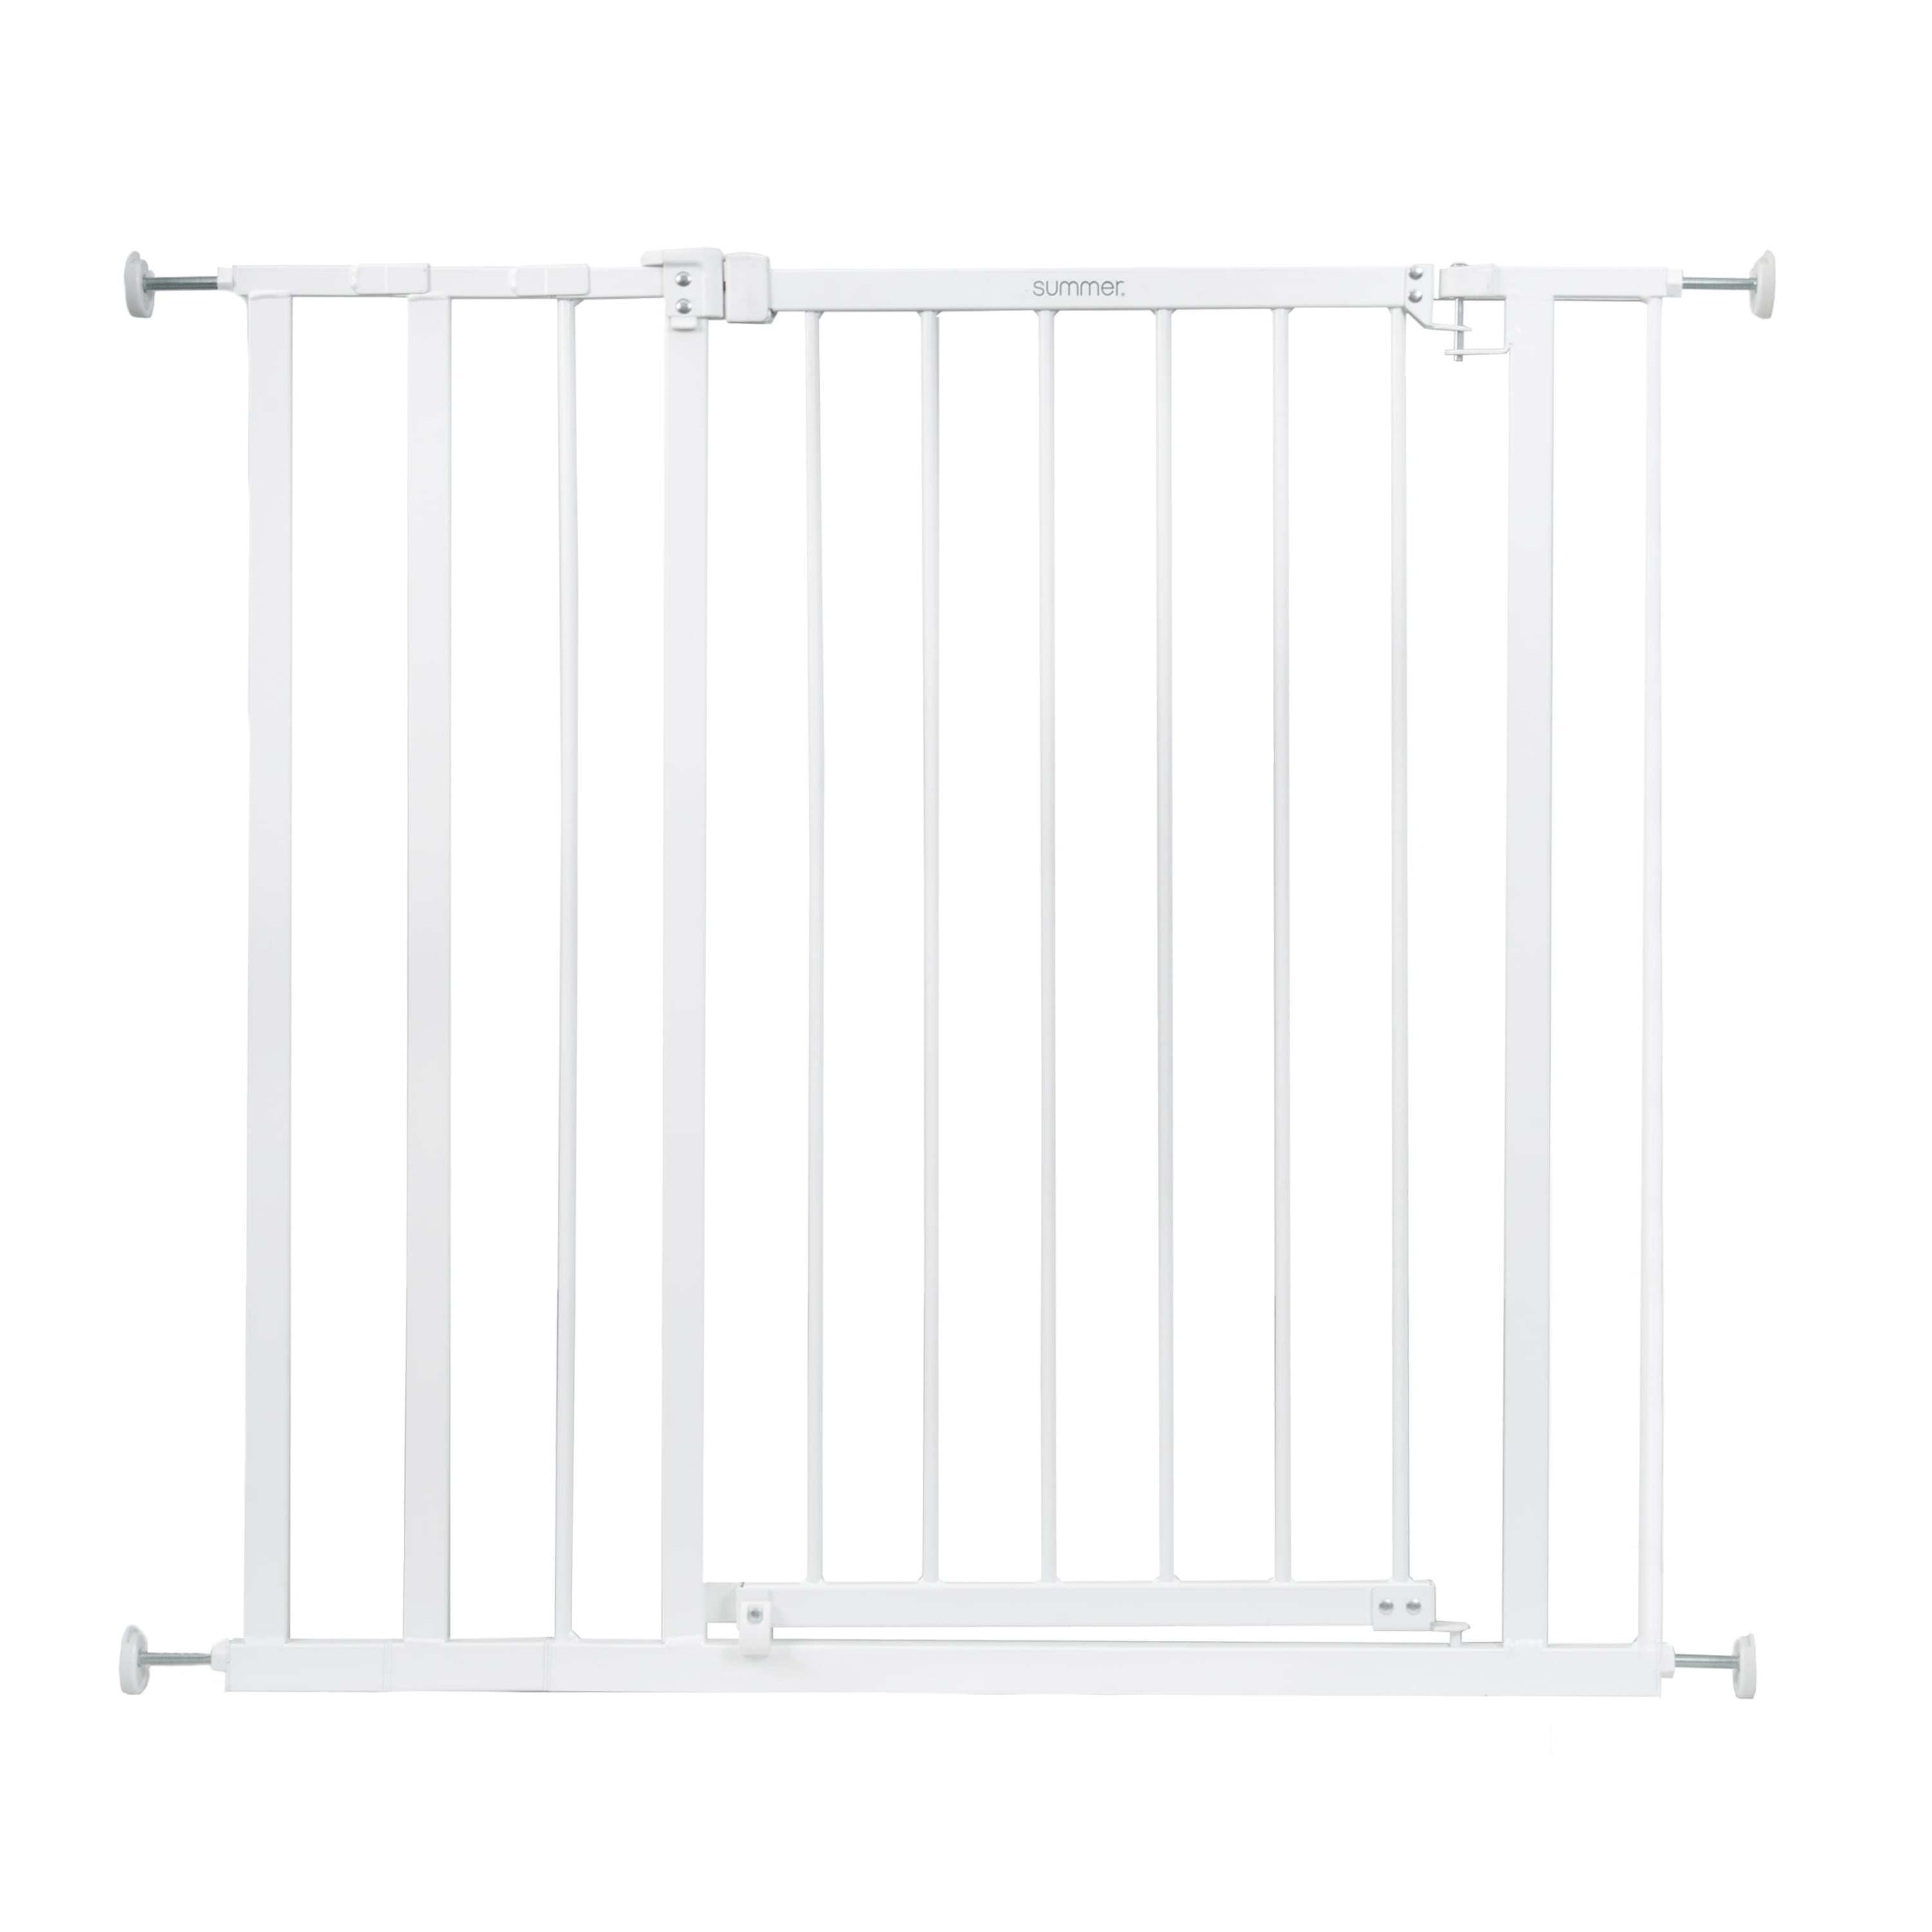 HEARTH GATE BABY SAFETY GATE 72CM EXTENSION NEW BABYDAN WHITE CONFIGURE 